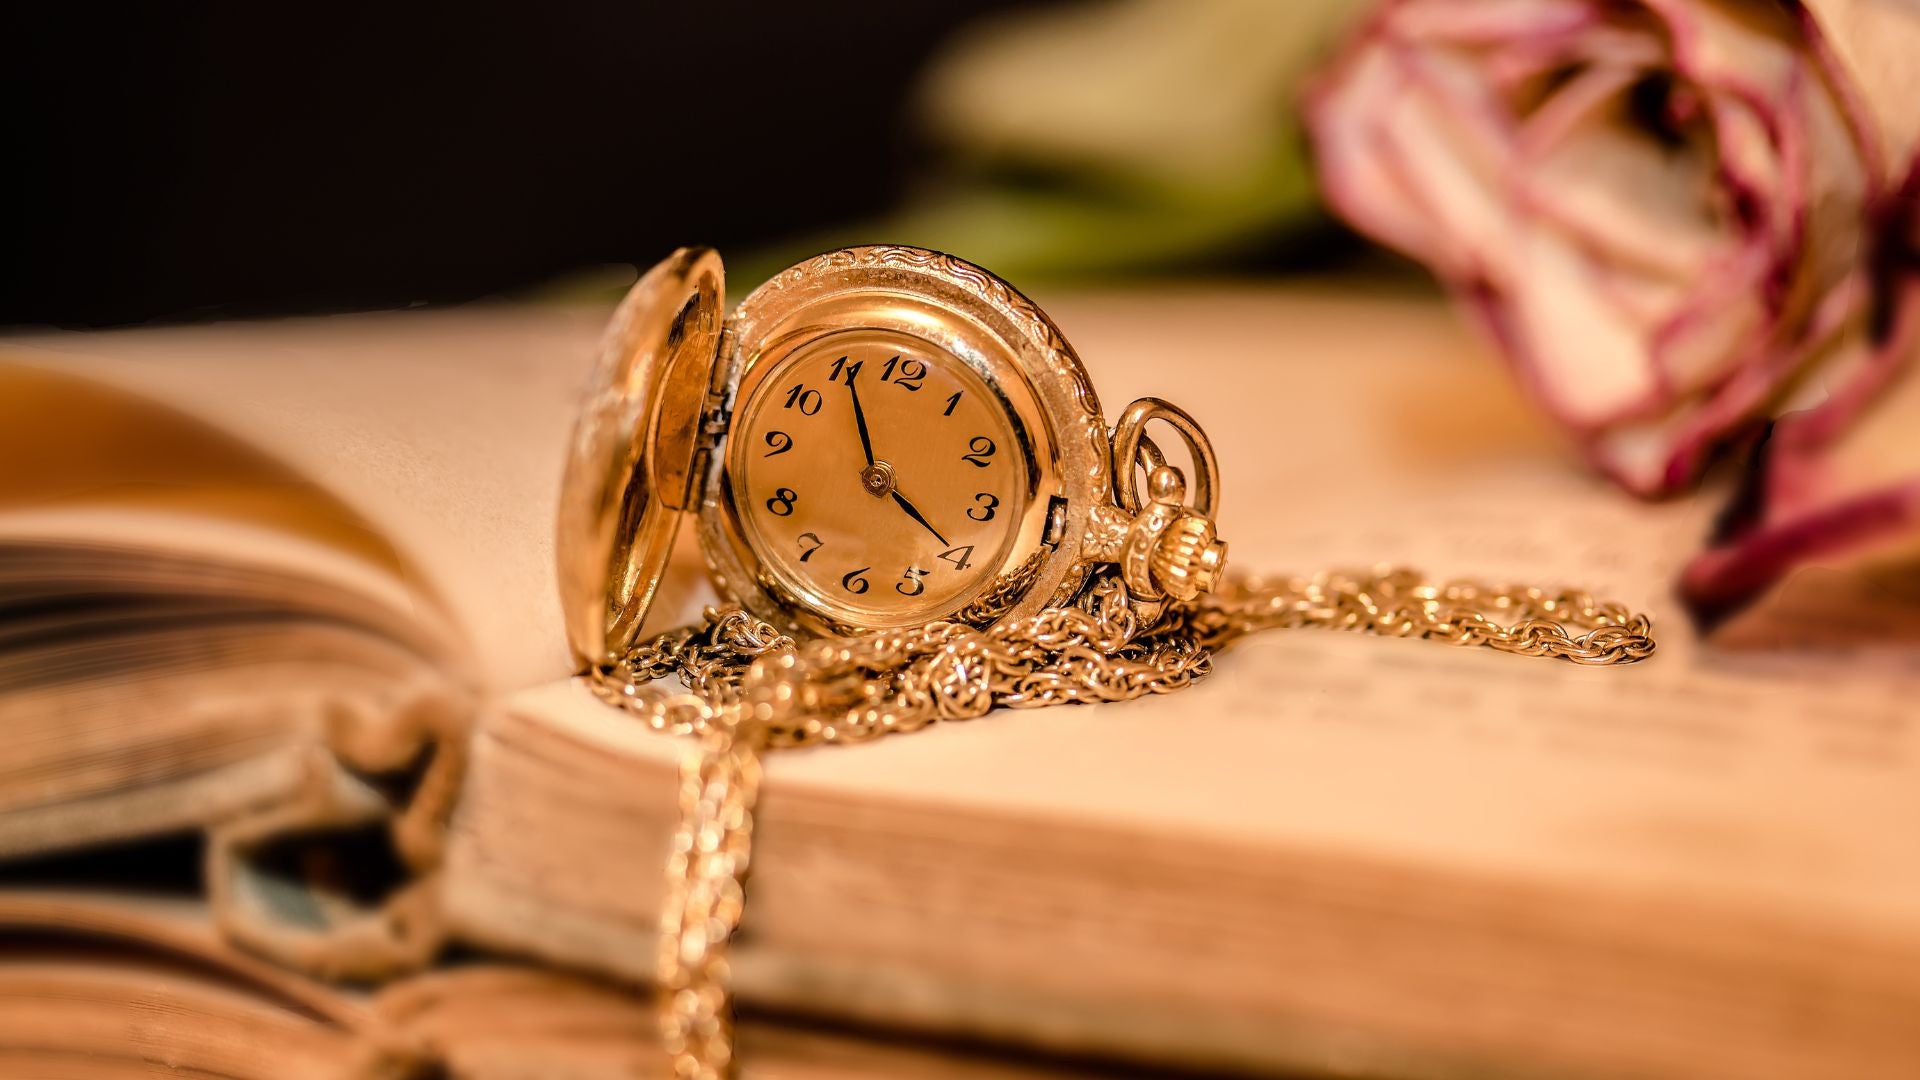 50th Birthday Gift Ideas which is Exquisite Timepiece